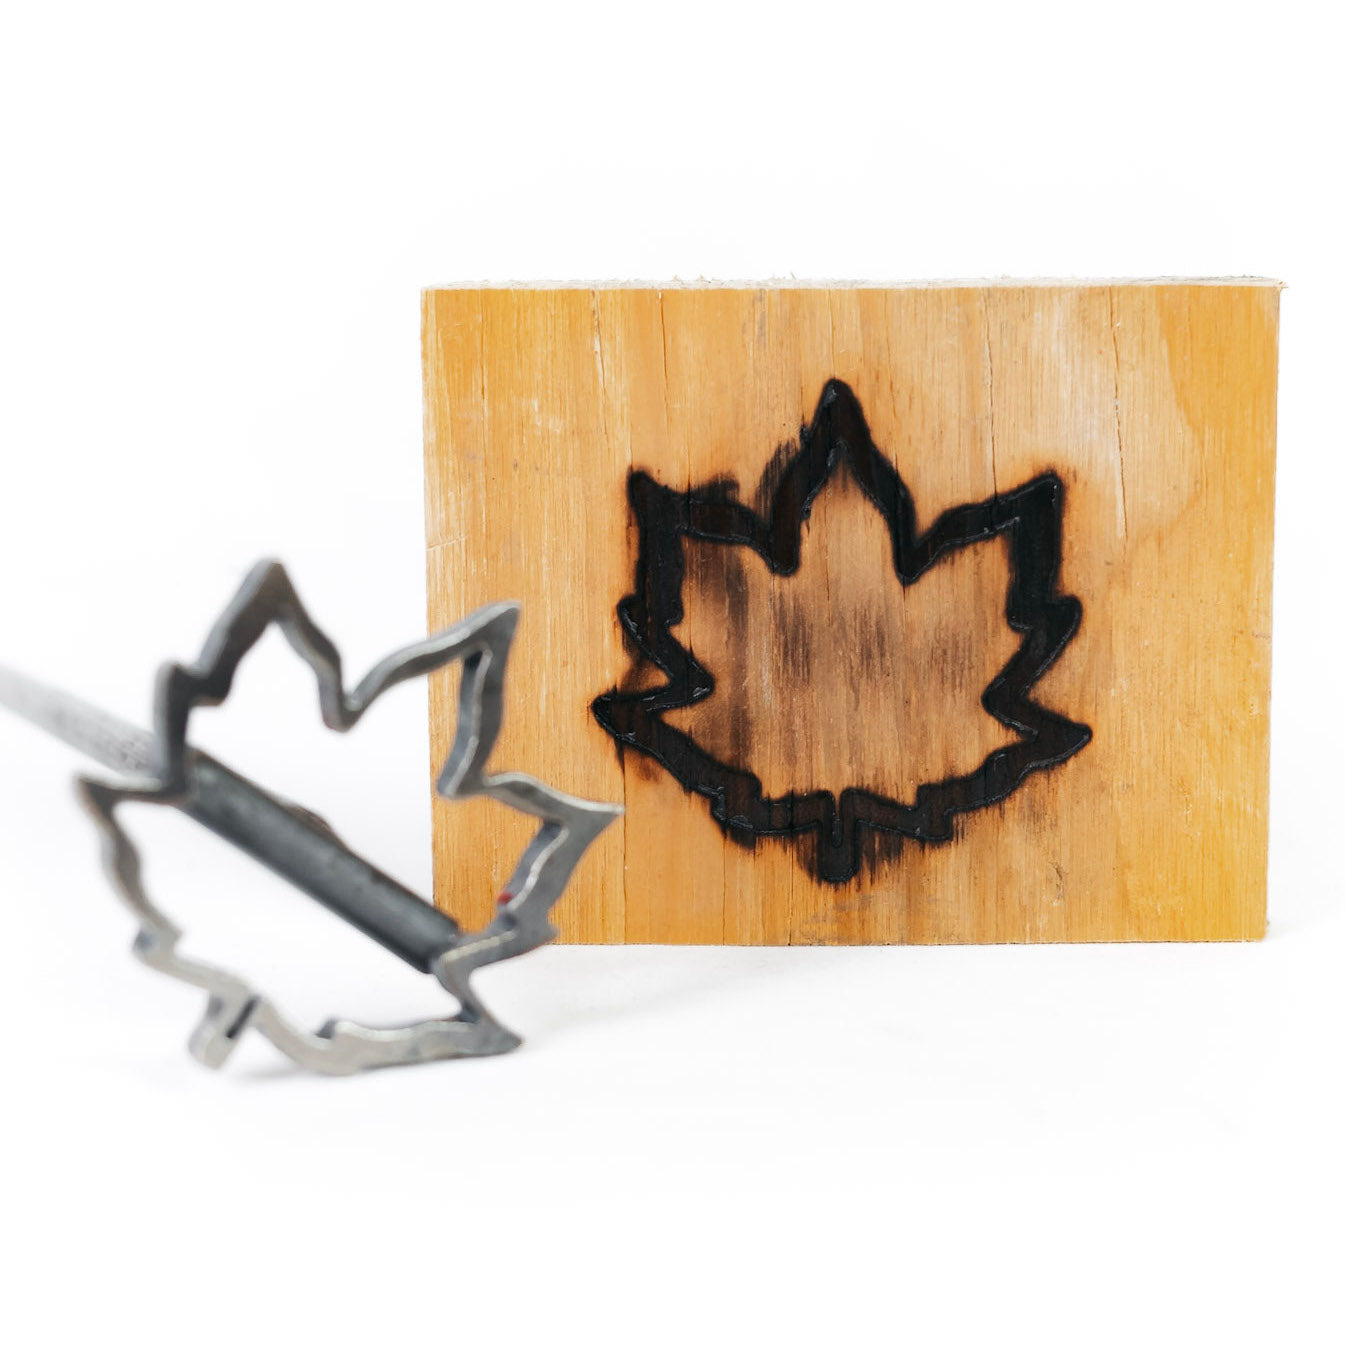 Maple Leaf Brand - 3" - BBQ, Crafts, Woodworking Projects - The Heritage Forge